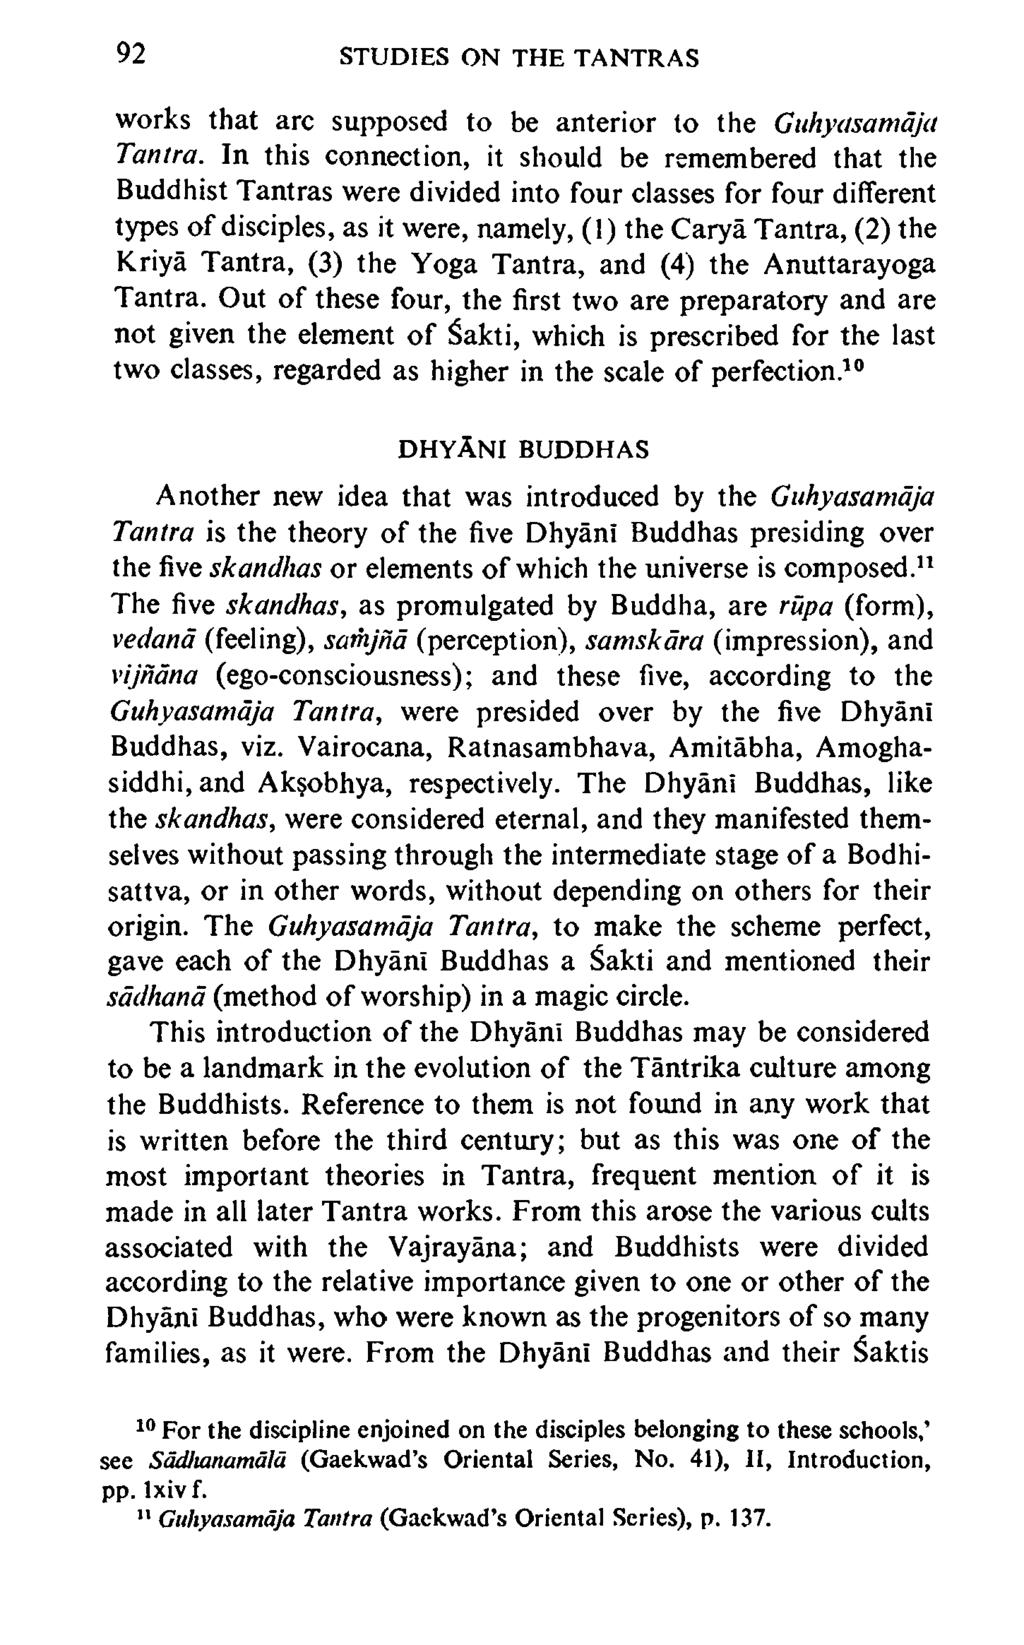 92 STUDIES ON THE TANTRAS works that arc supposed to be anterior to the Guhyasamaja Tantra.